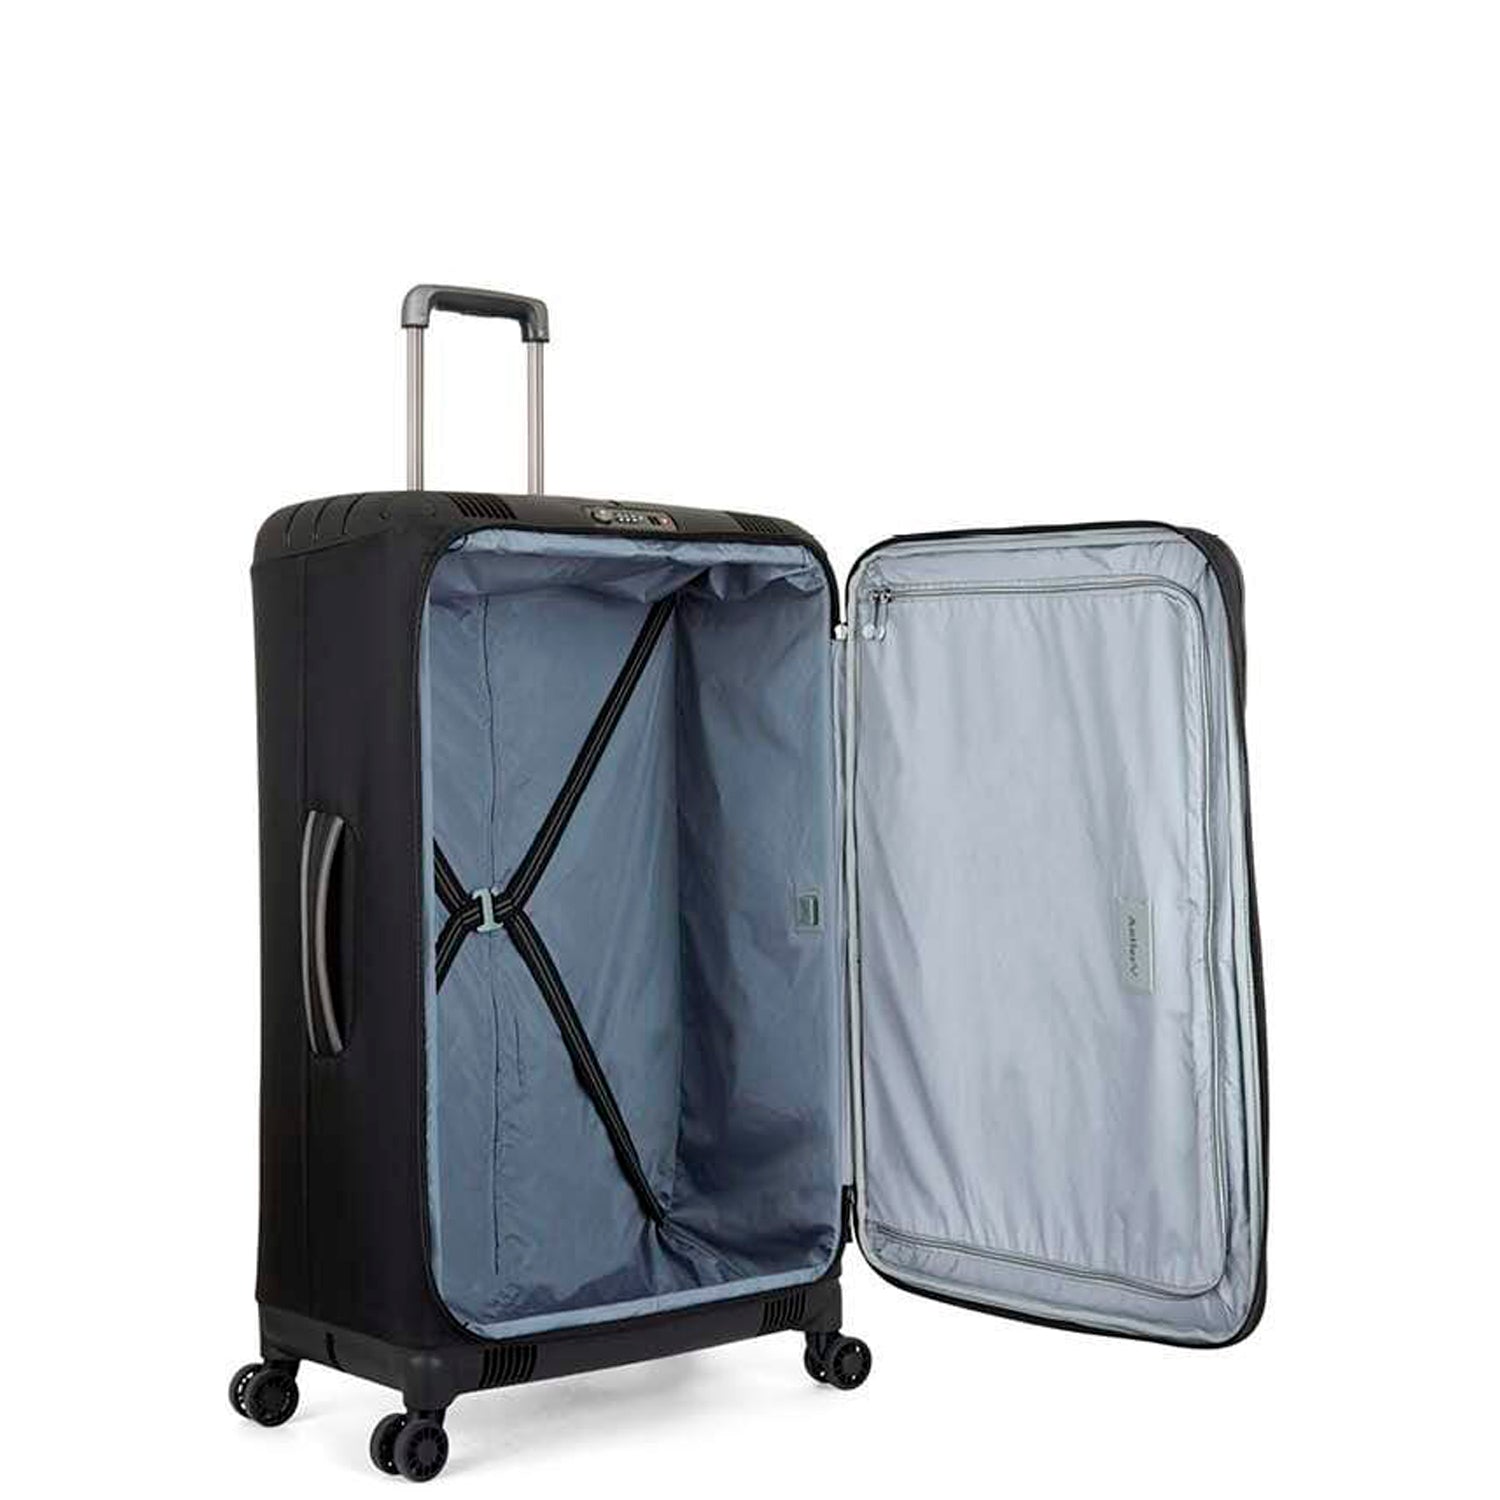 Antler Titus Collection Suitcase-Large Check In Navy/Black